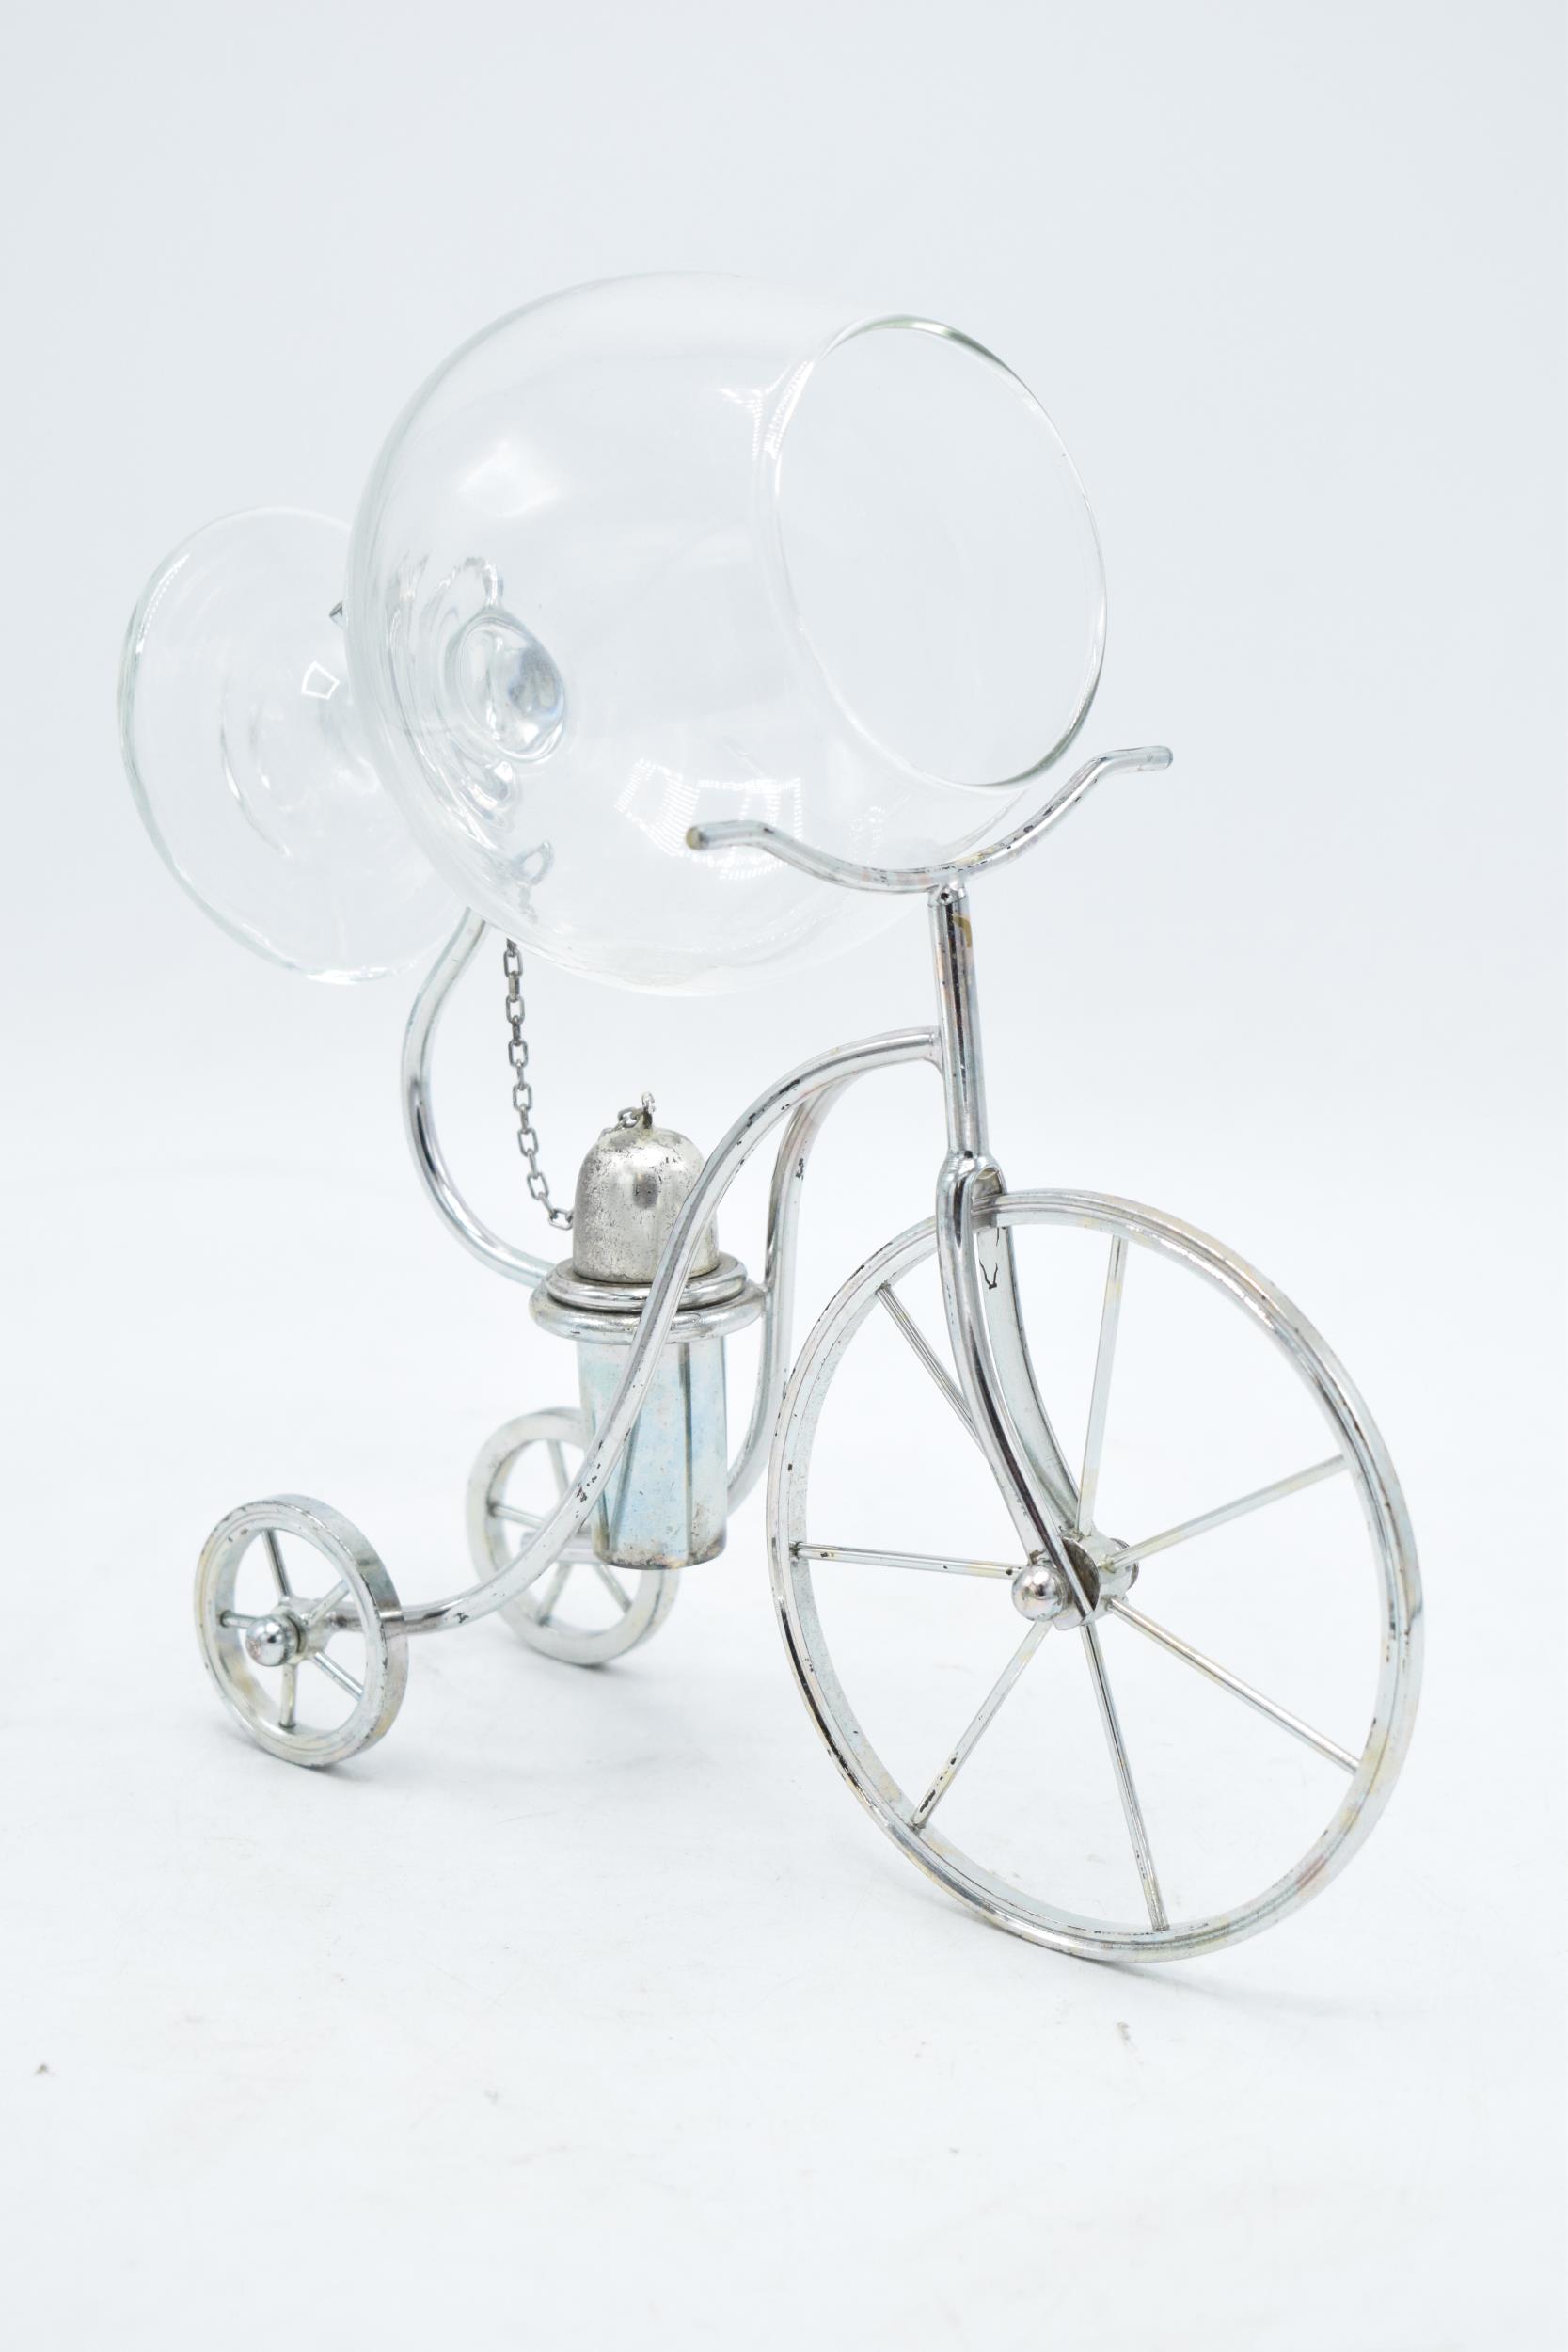 A novelty silver plated brandy warmer in the form of a tricycle / penny farthing style with a glass. - Image 2 of 5